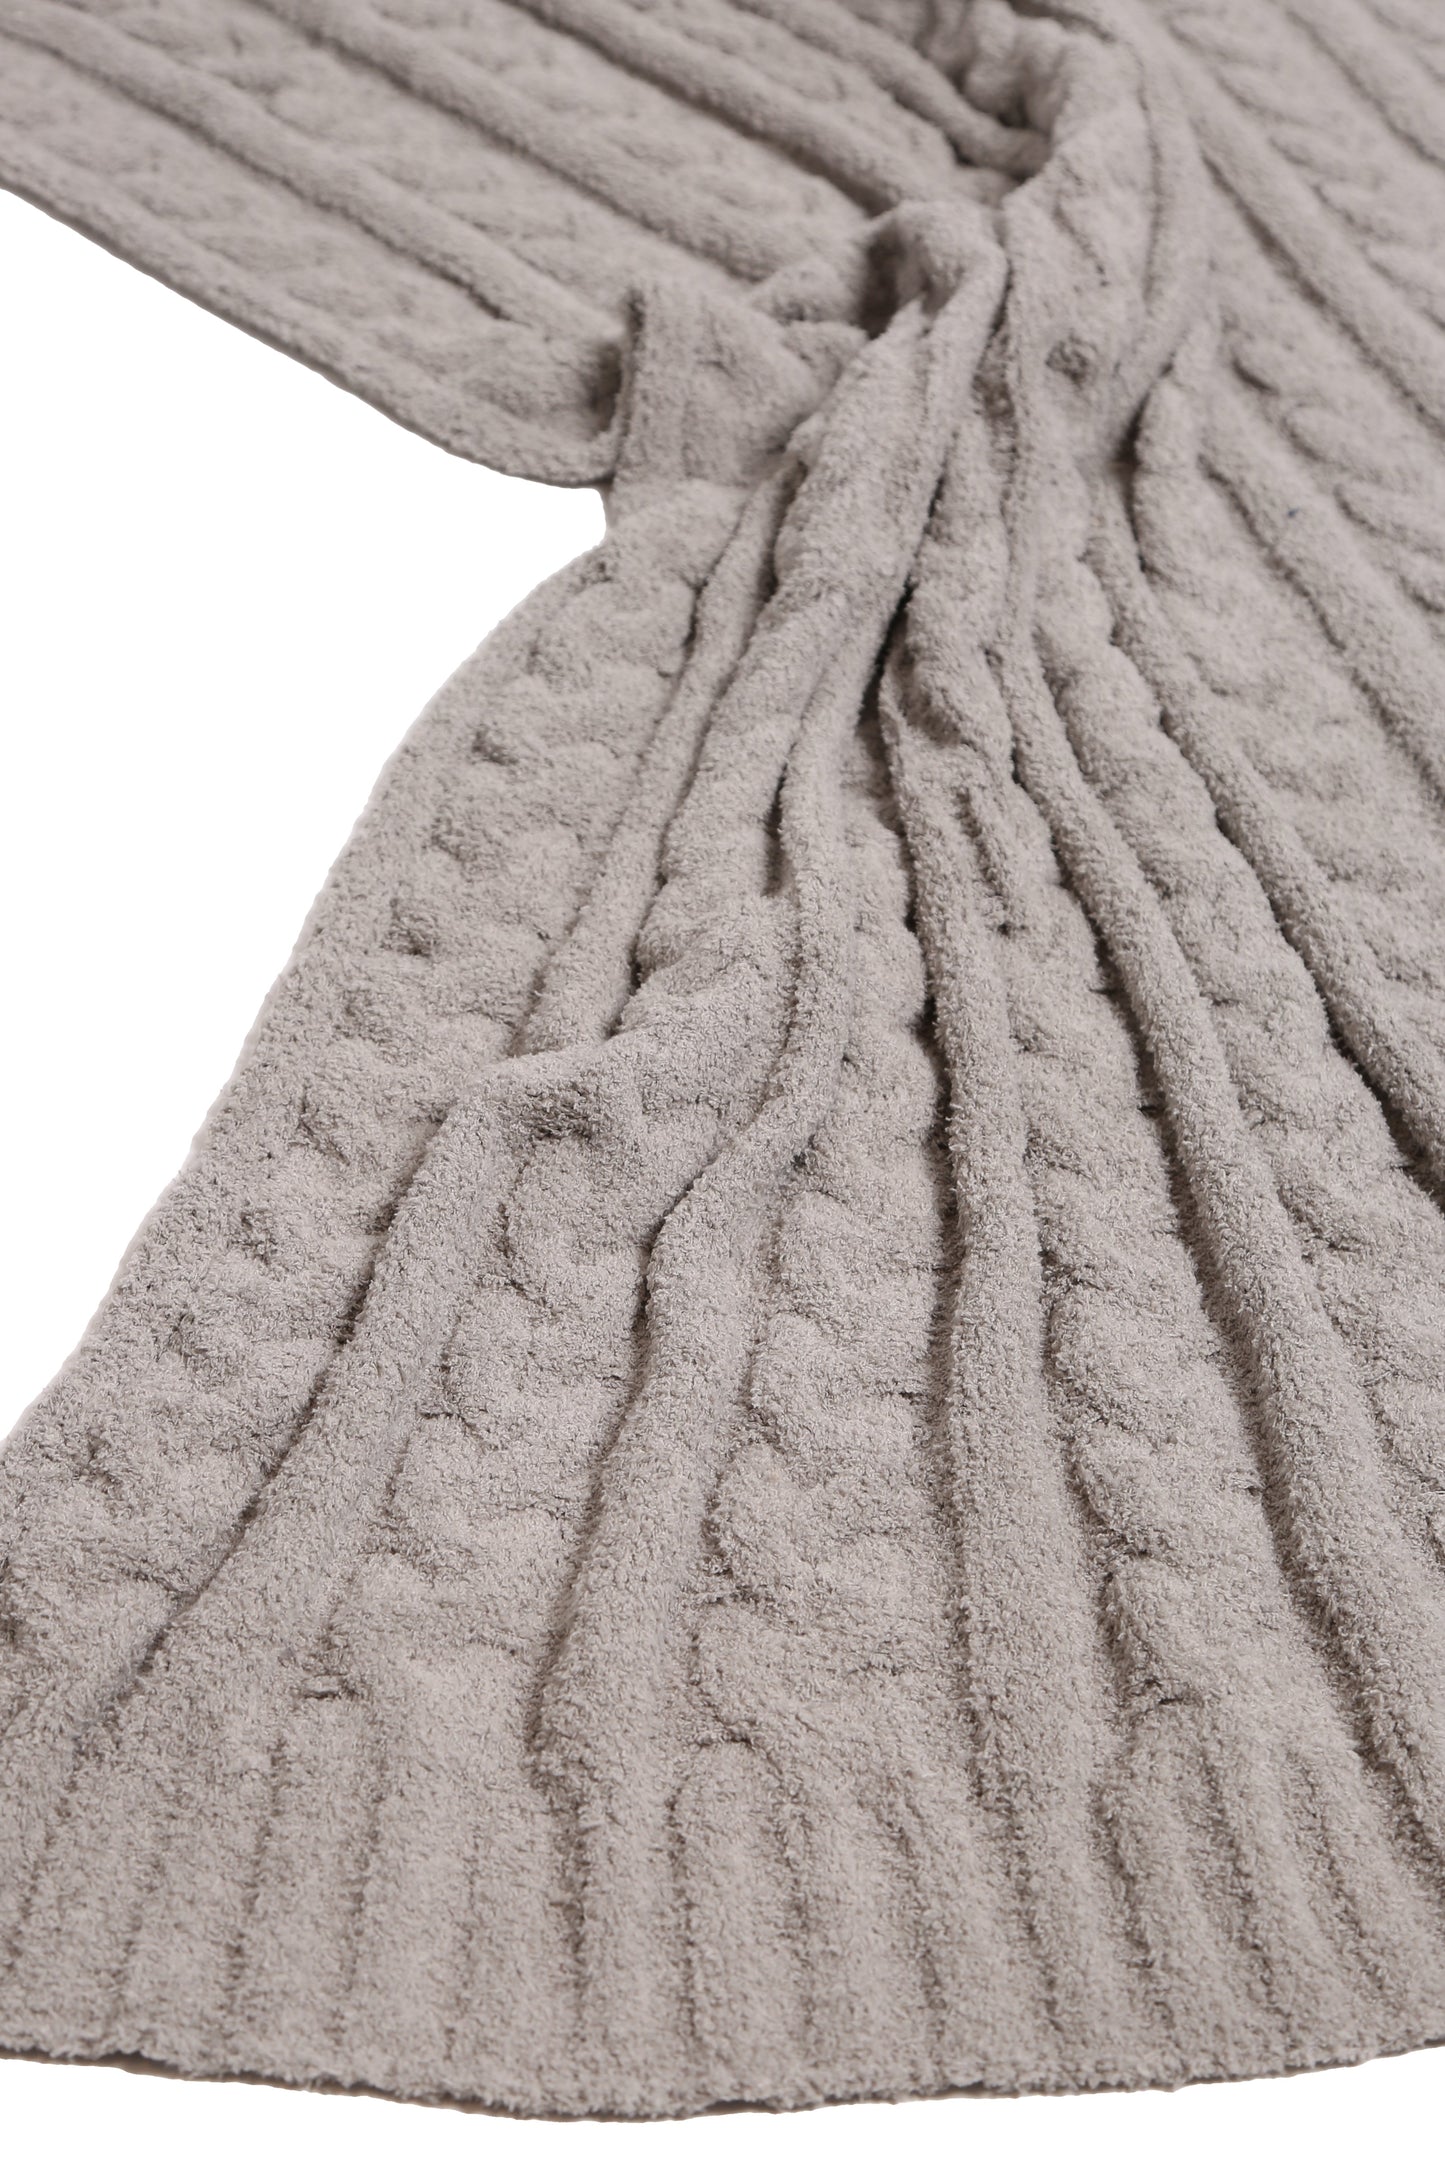 Braided Cable Knit Throw Blanket Gifts Gray